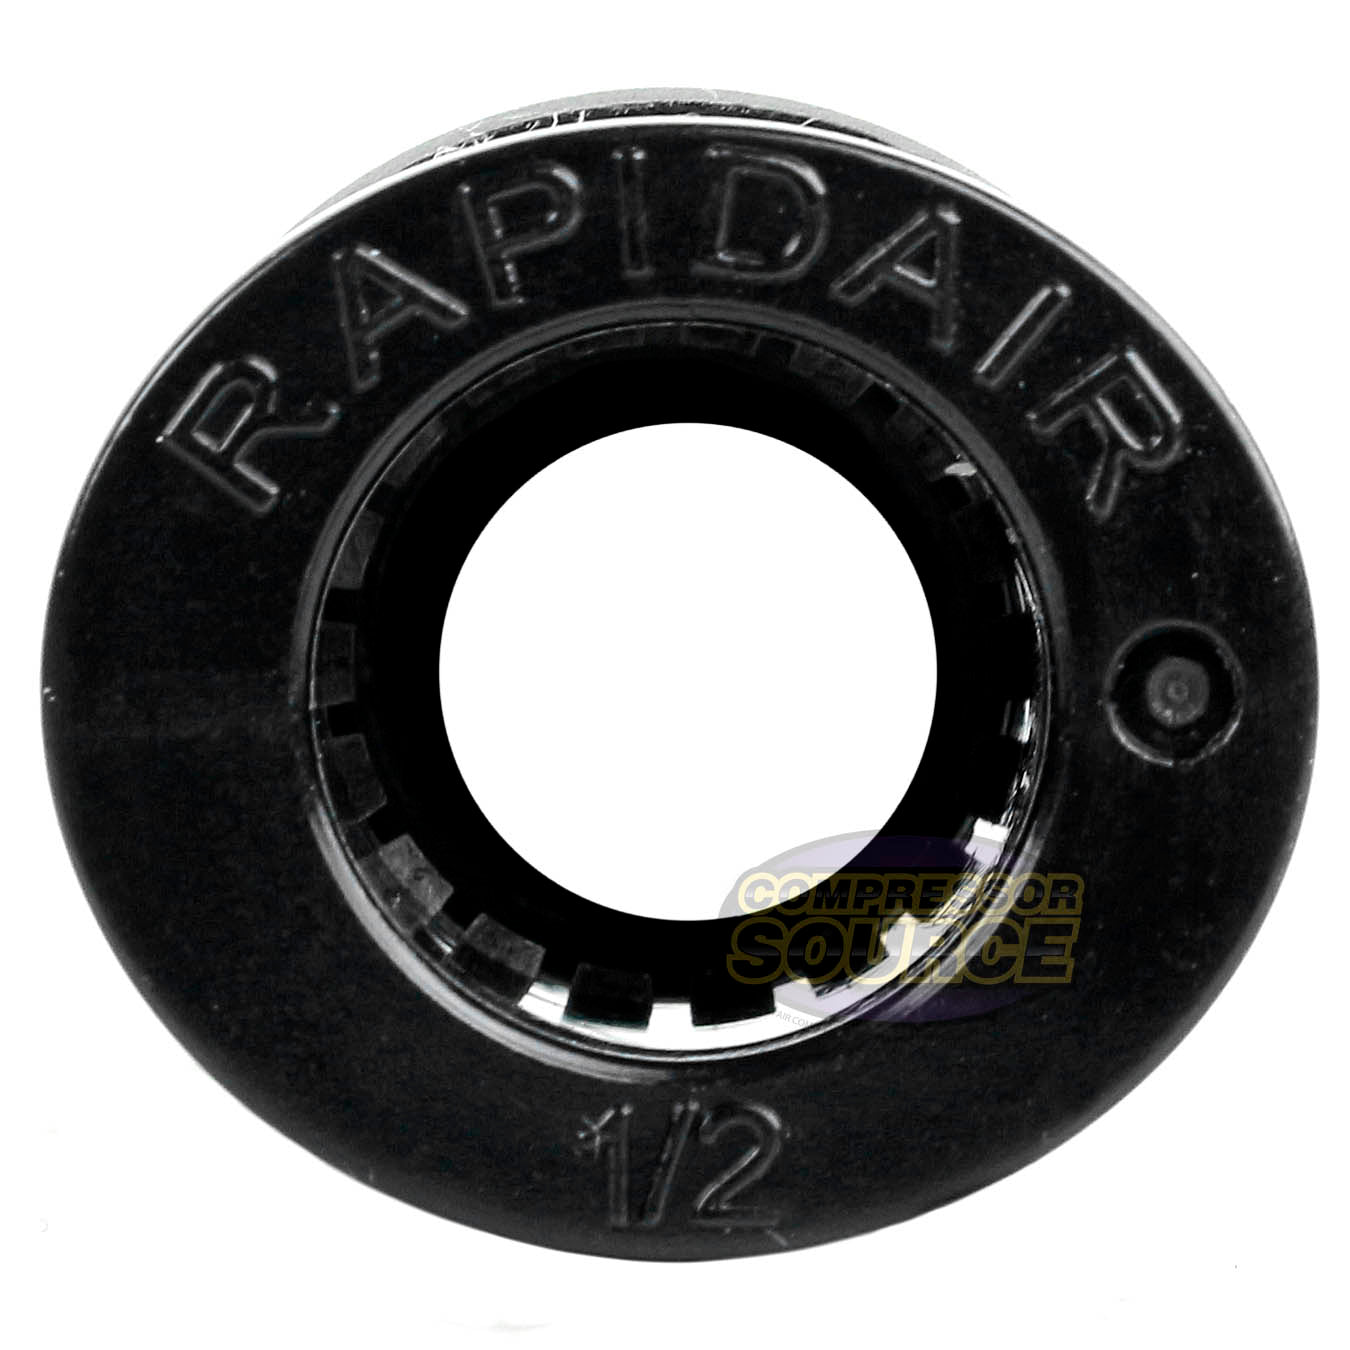 RapidAir Union Push Lock Fitting Rapid Air Tubing Piping Connector New # 50500